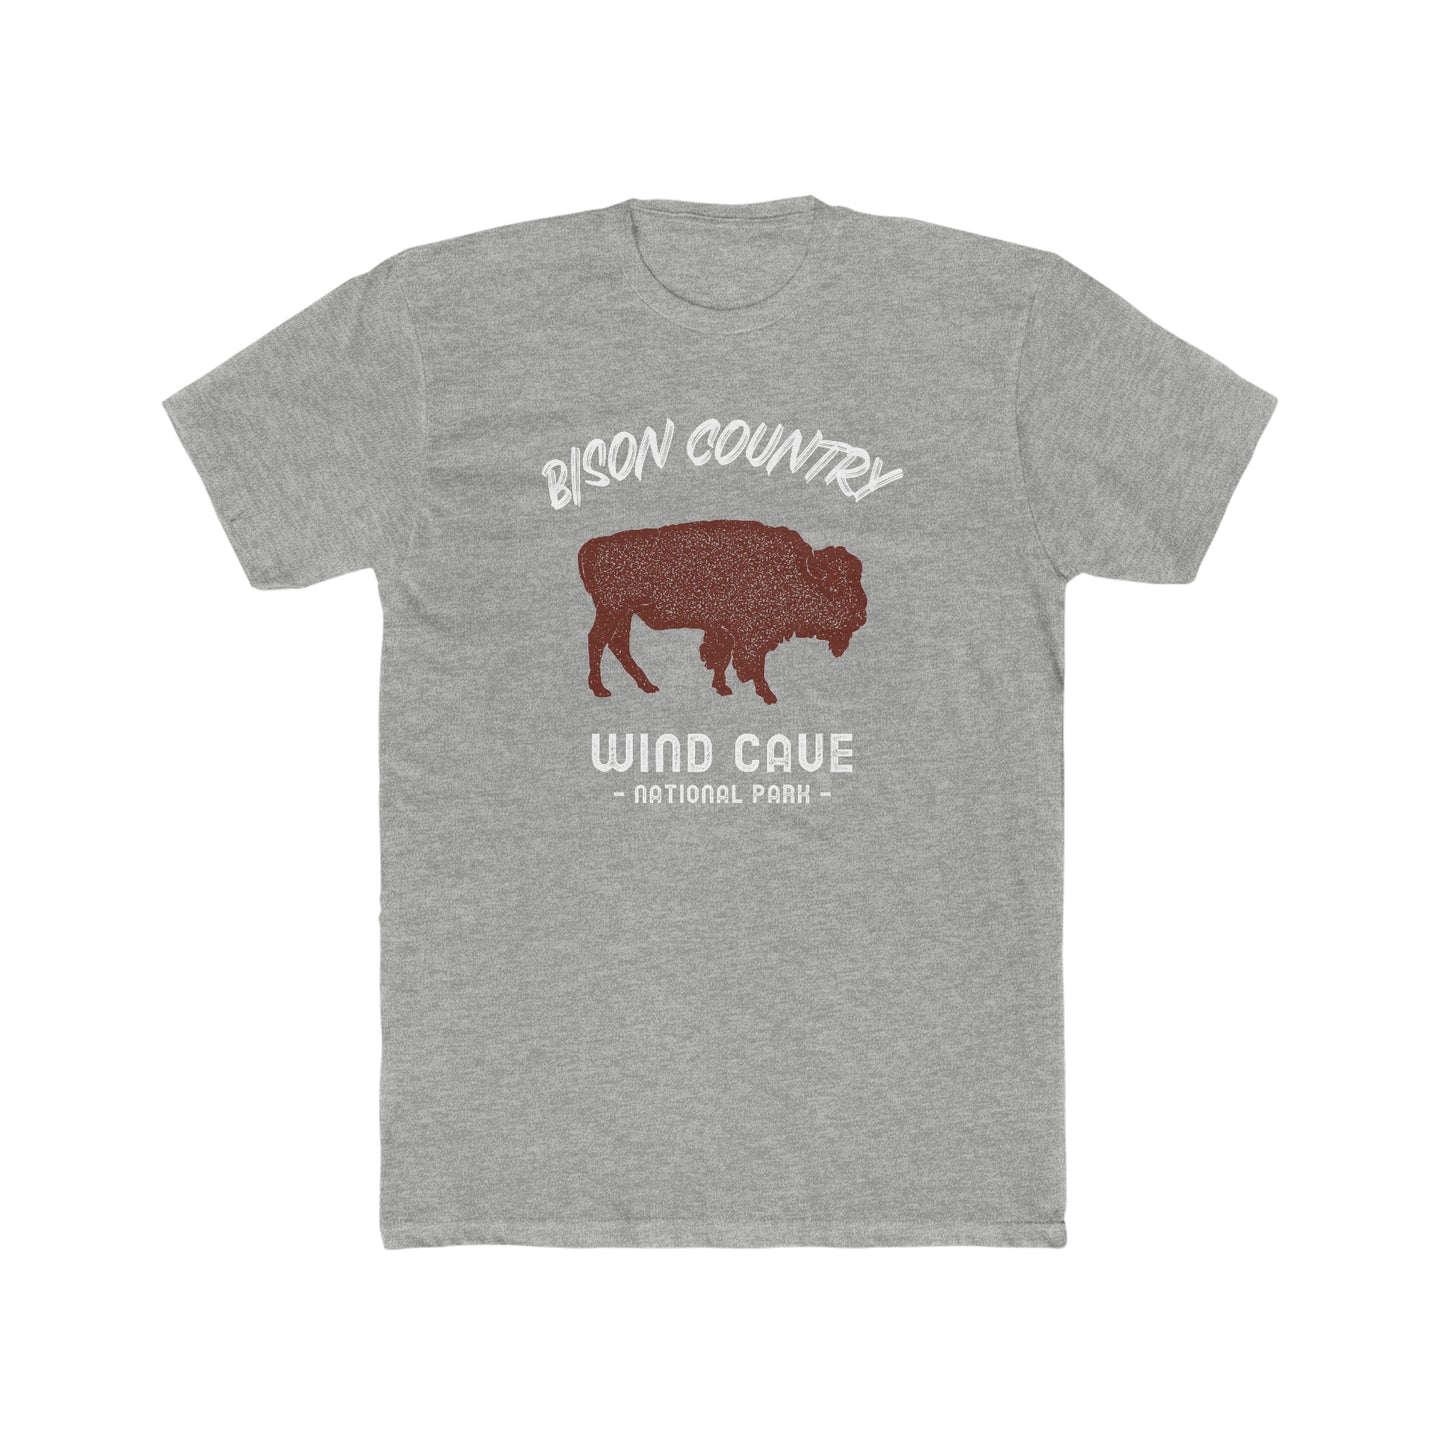 Wind Cave National Park T-Shirt - Bison Country